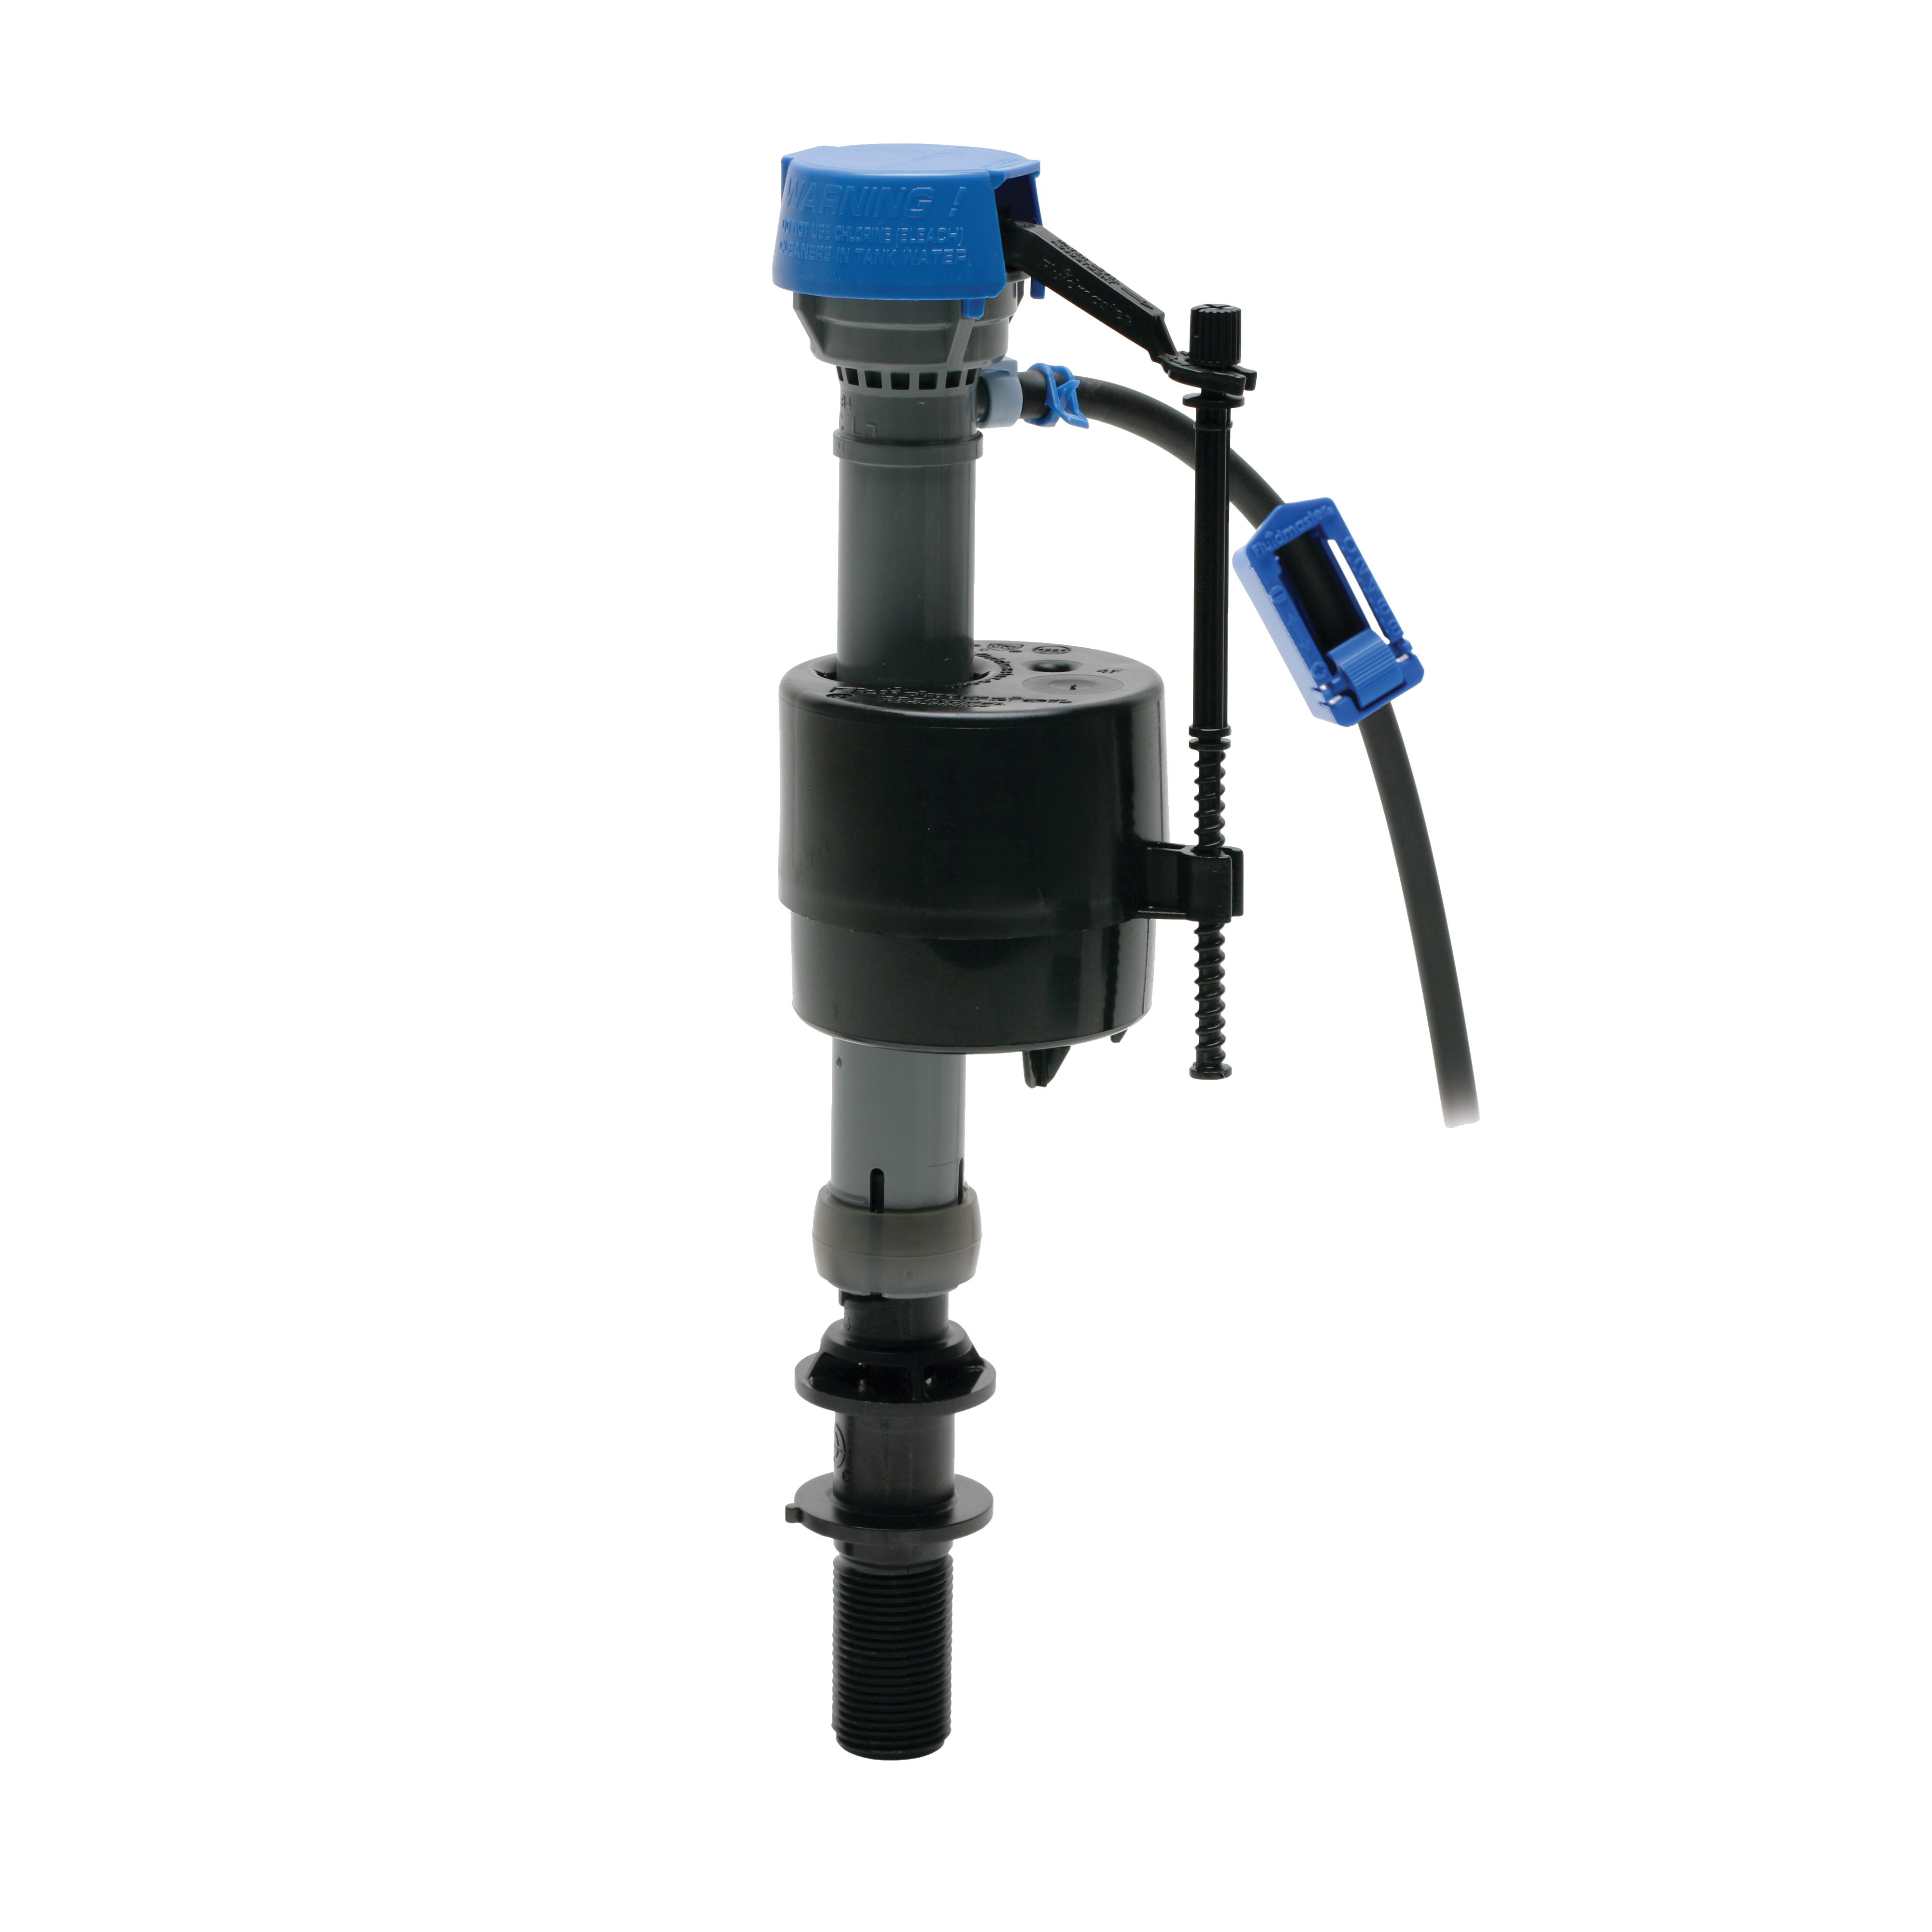 PerforMAX Series 400ARHR Toilet Fill Valve, 10 to 15 in Connection, Plastic Body, Anti-Siphon: Yes